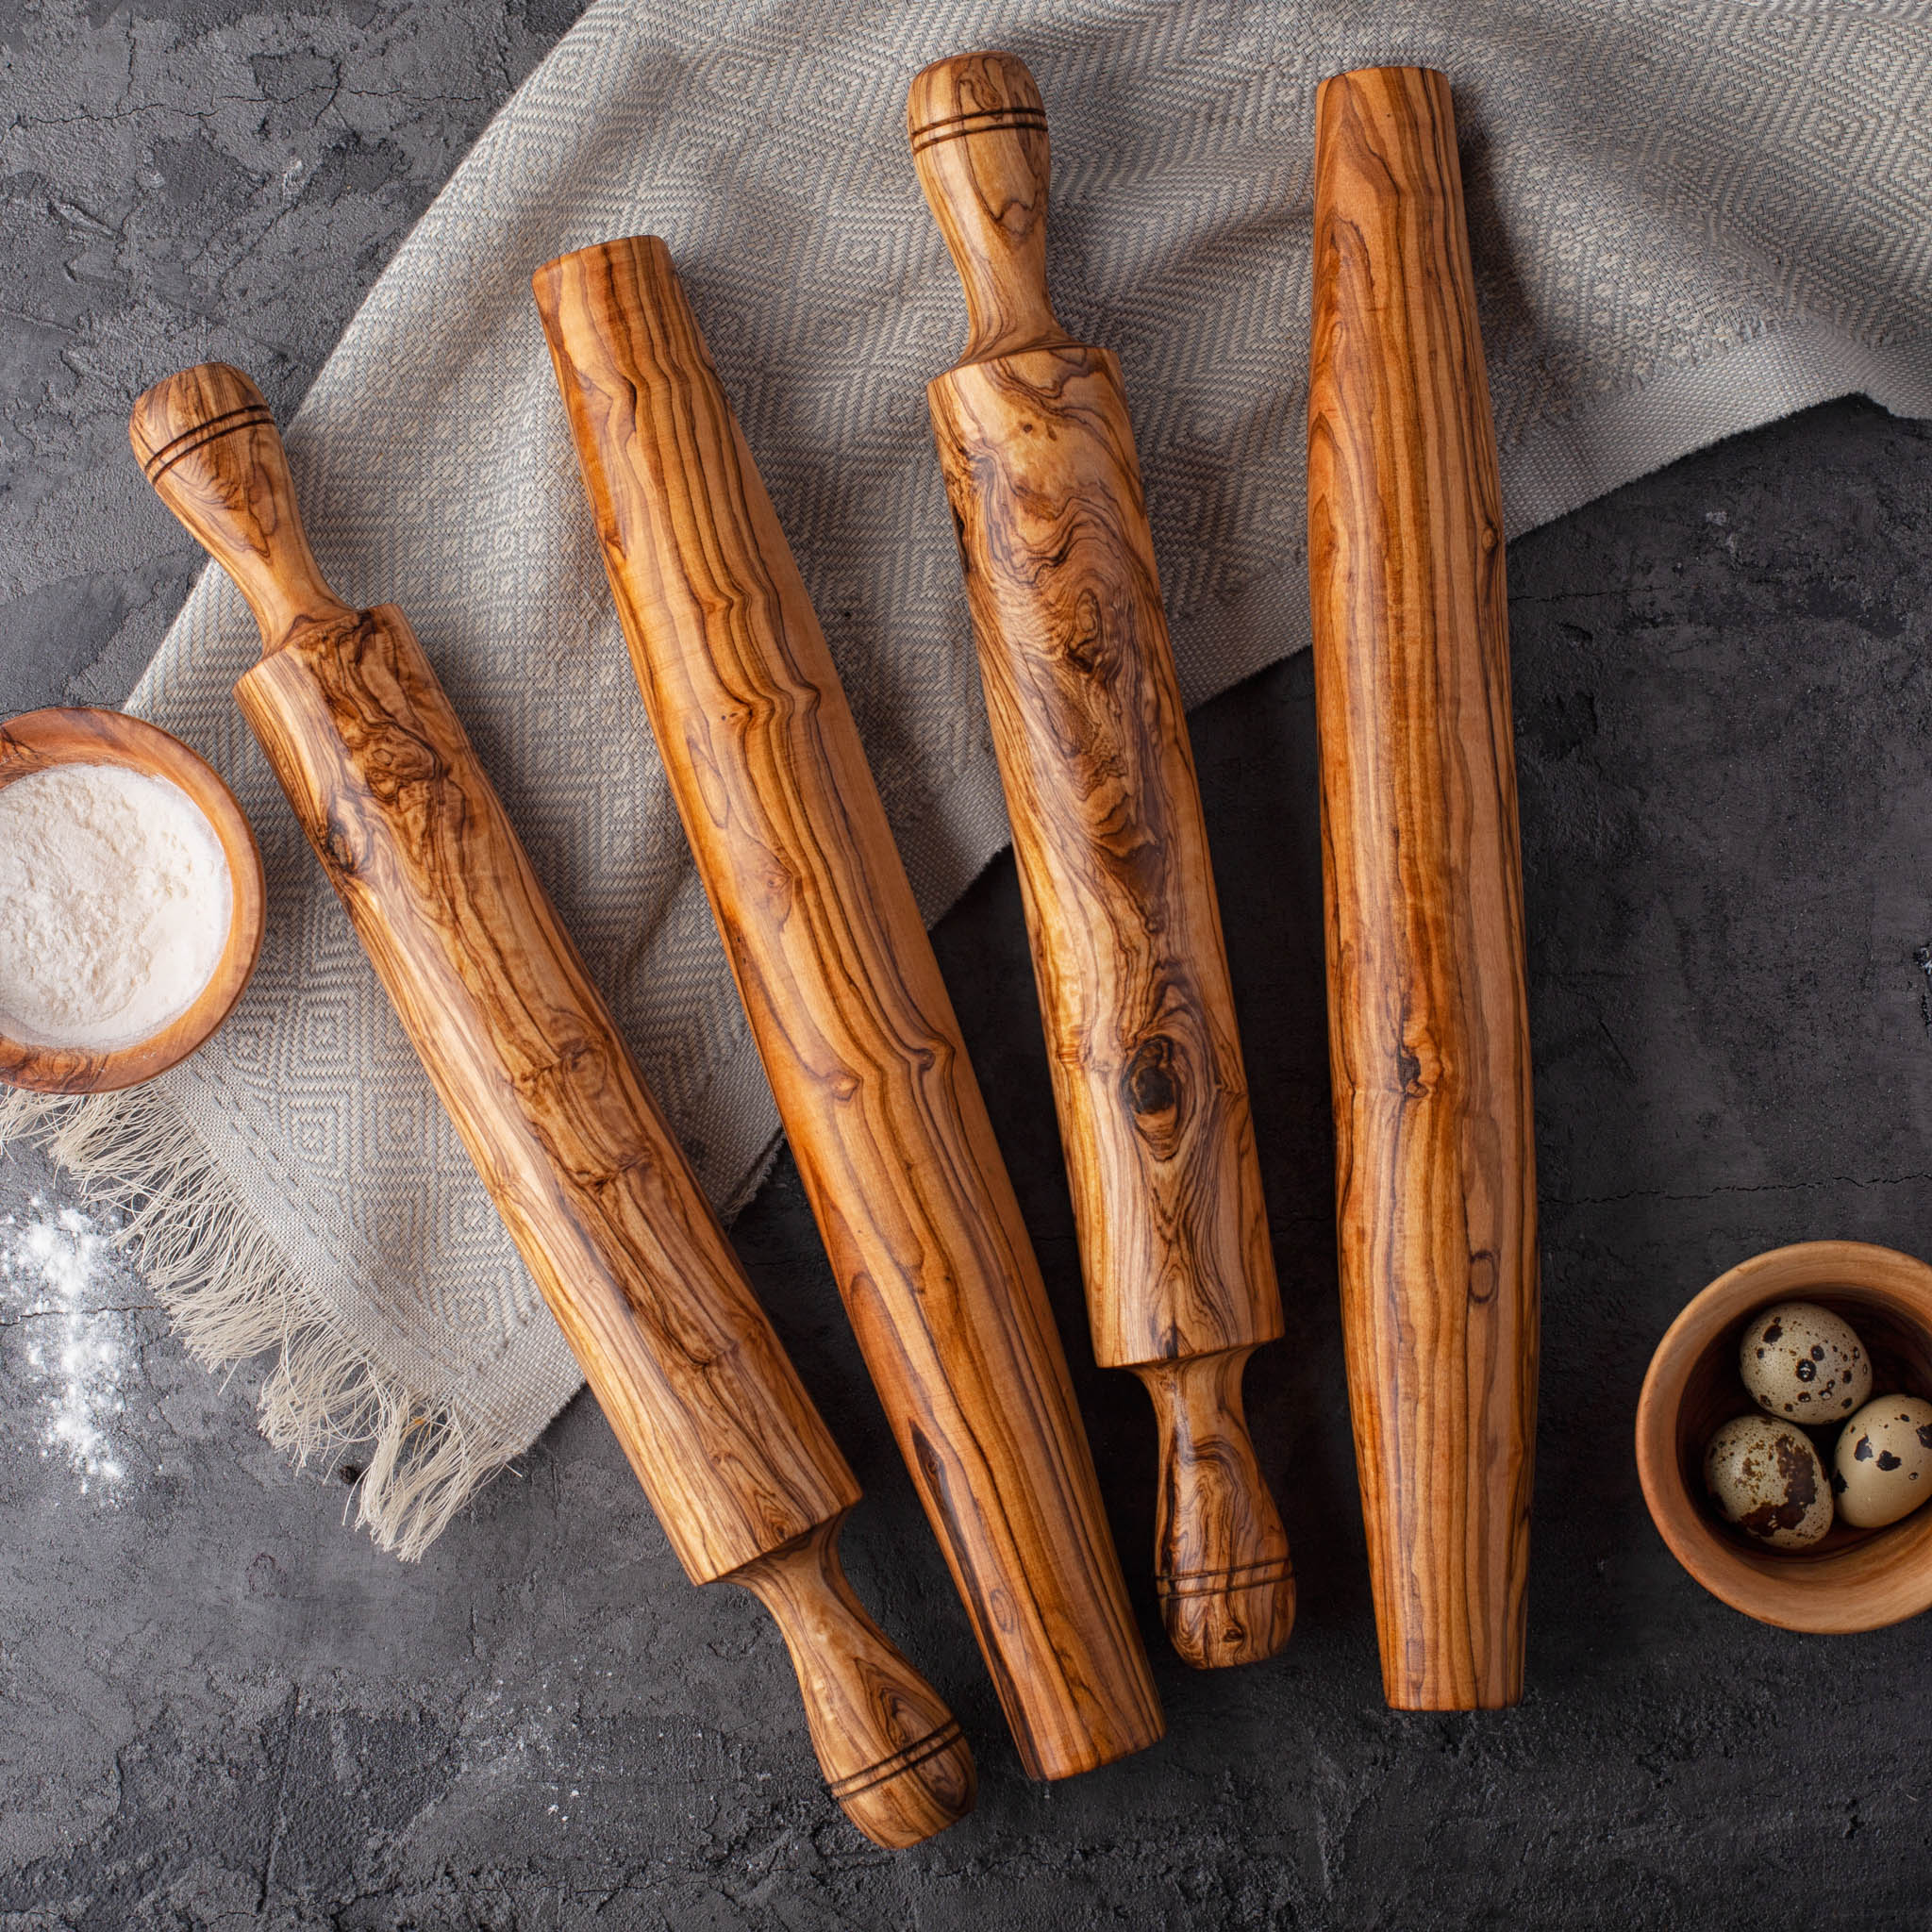 Caring and Cleaning for Your Wooden Rolling Pin